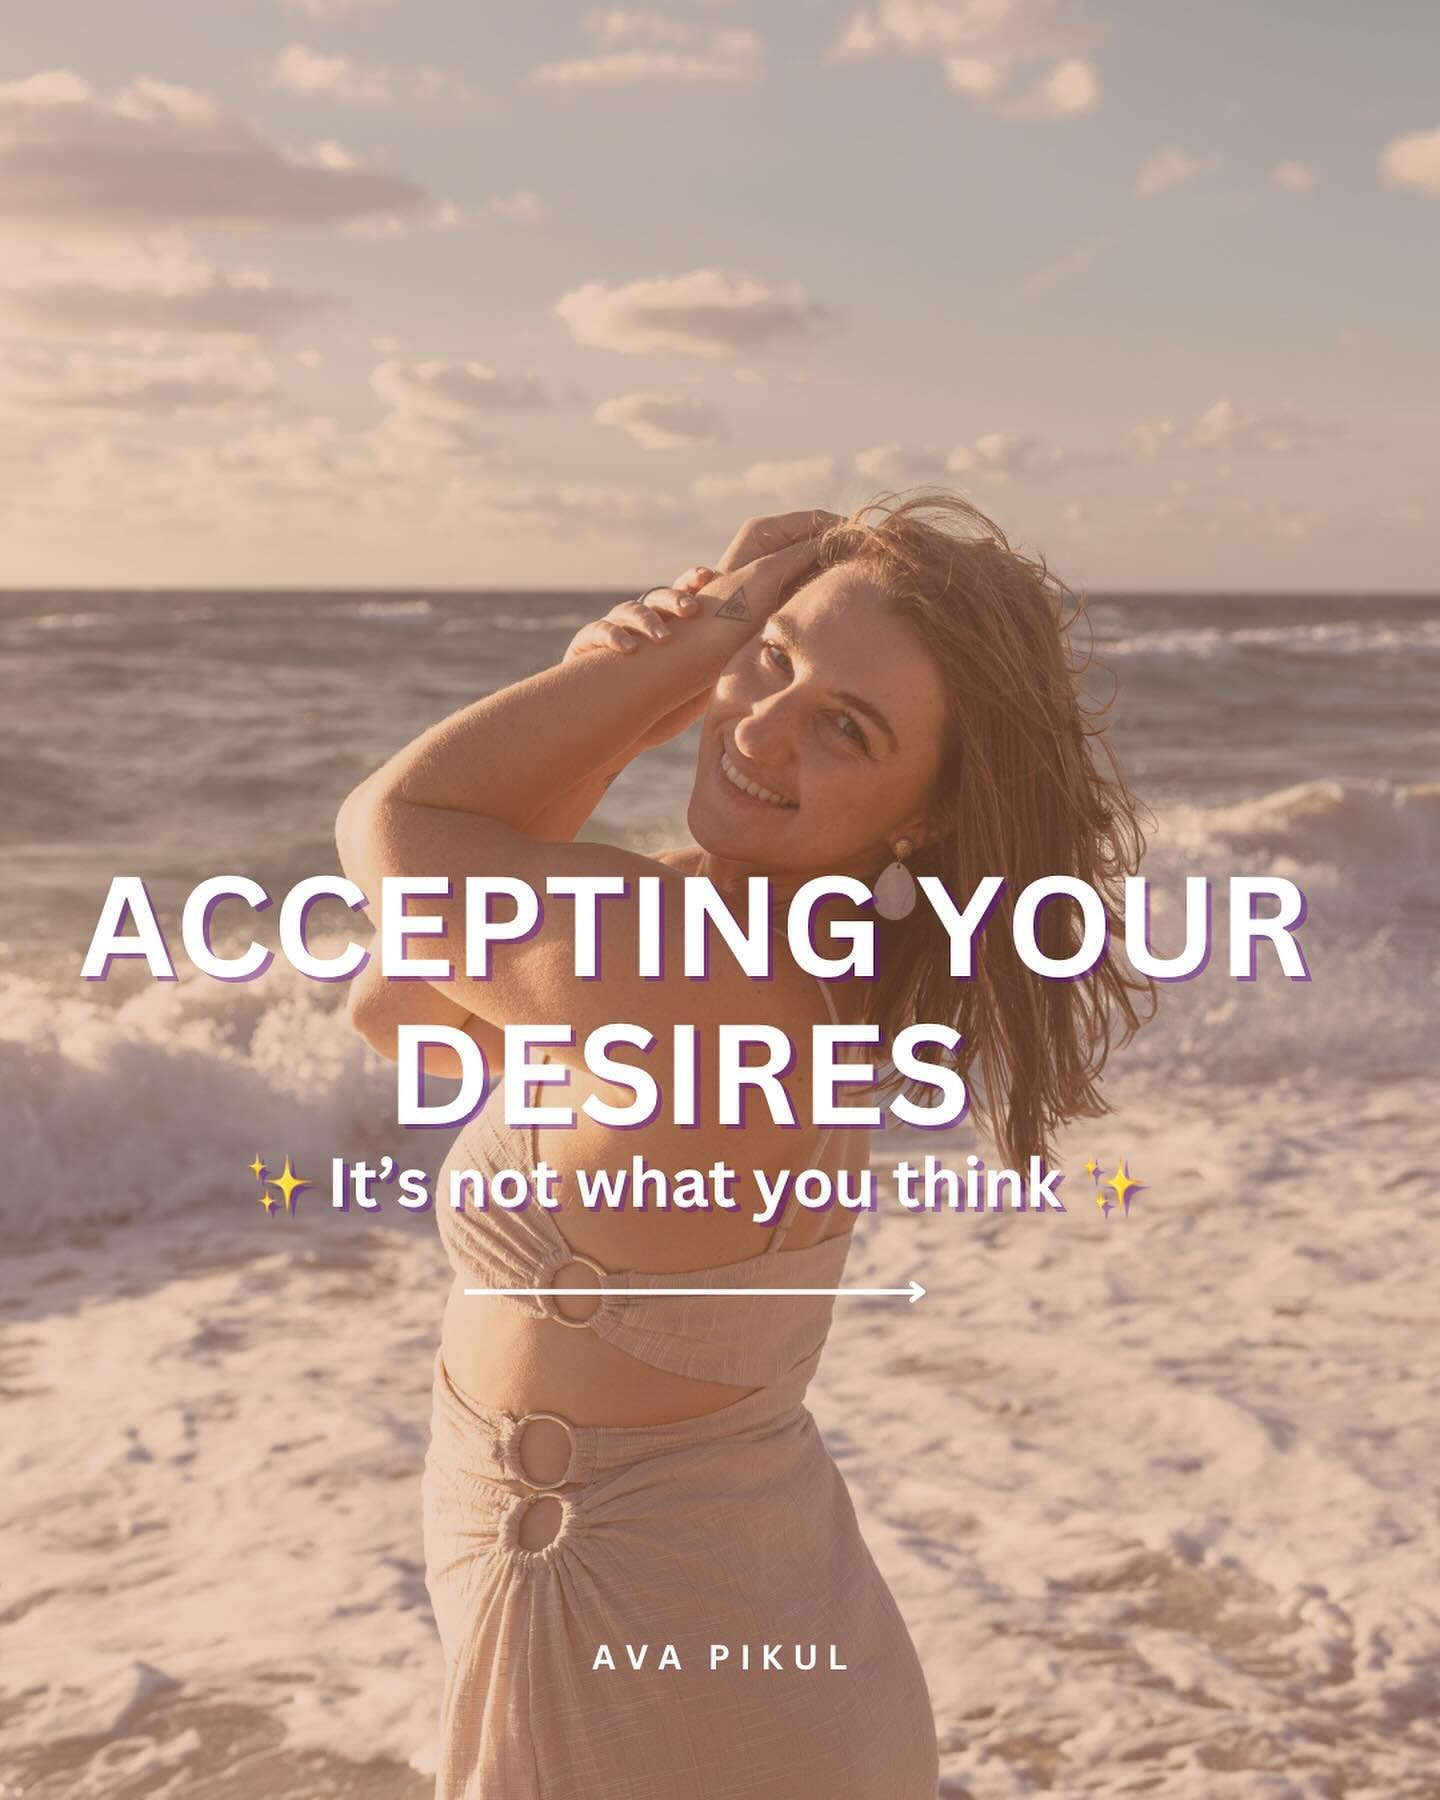 Within radical acceptance of yourself, what you will discover at the deepest level of any desire - is love. ✨

#acceptance #desire #selfacceptance #authentictantra #datingadvice #womensupportingwomen #menshealth